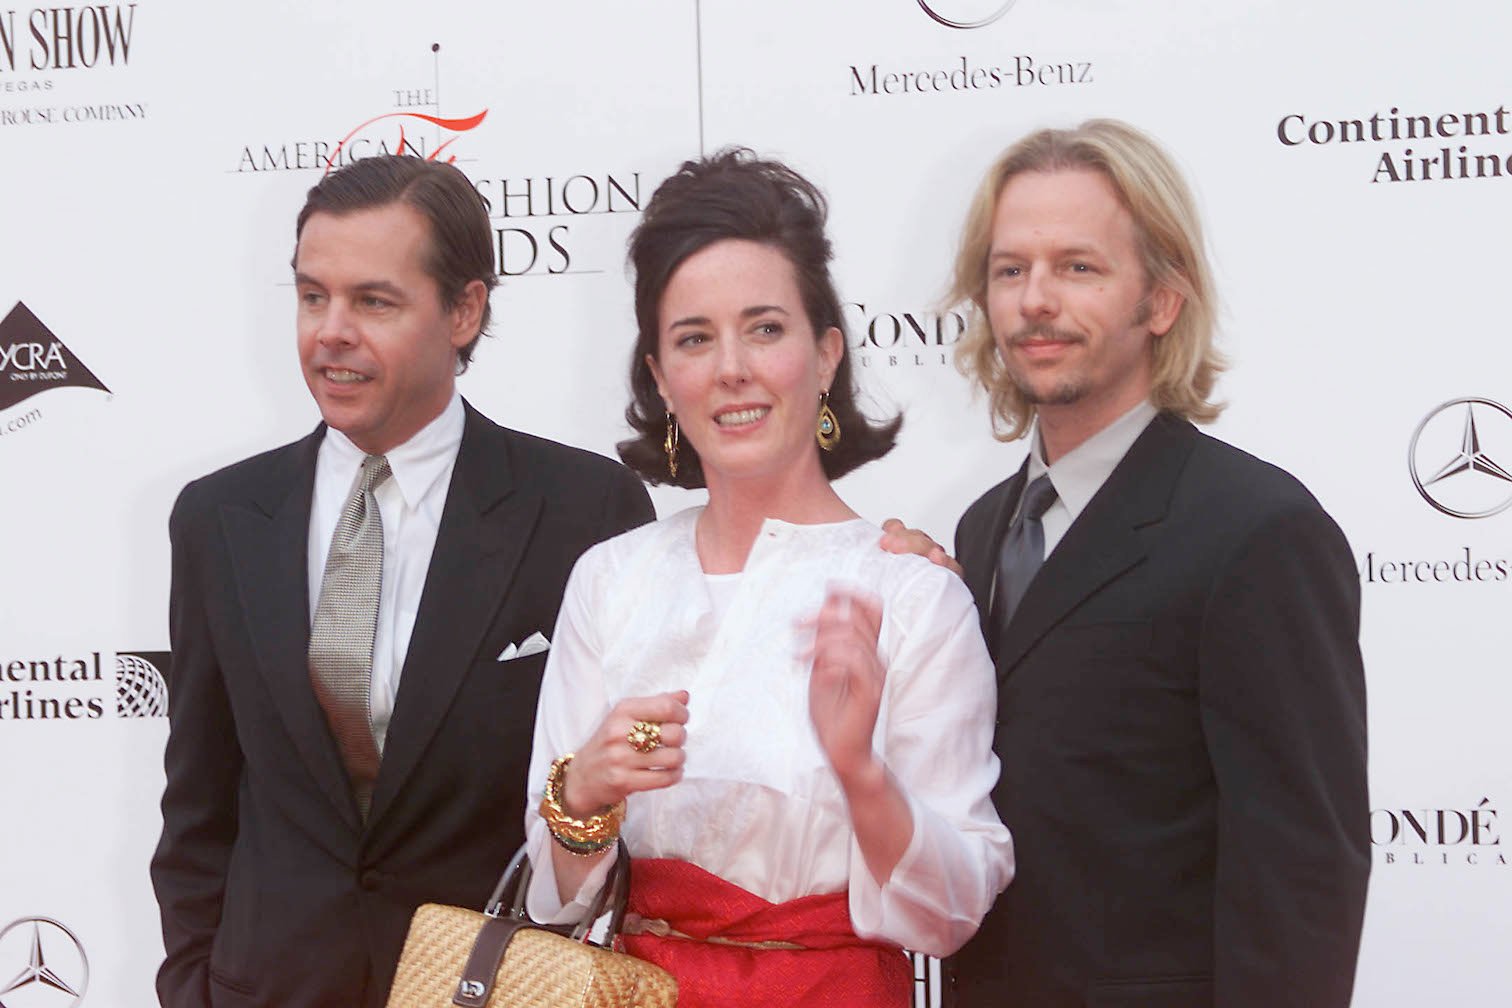 Kate Spade, Andy Spade, and David Spade smiling together at an event